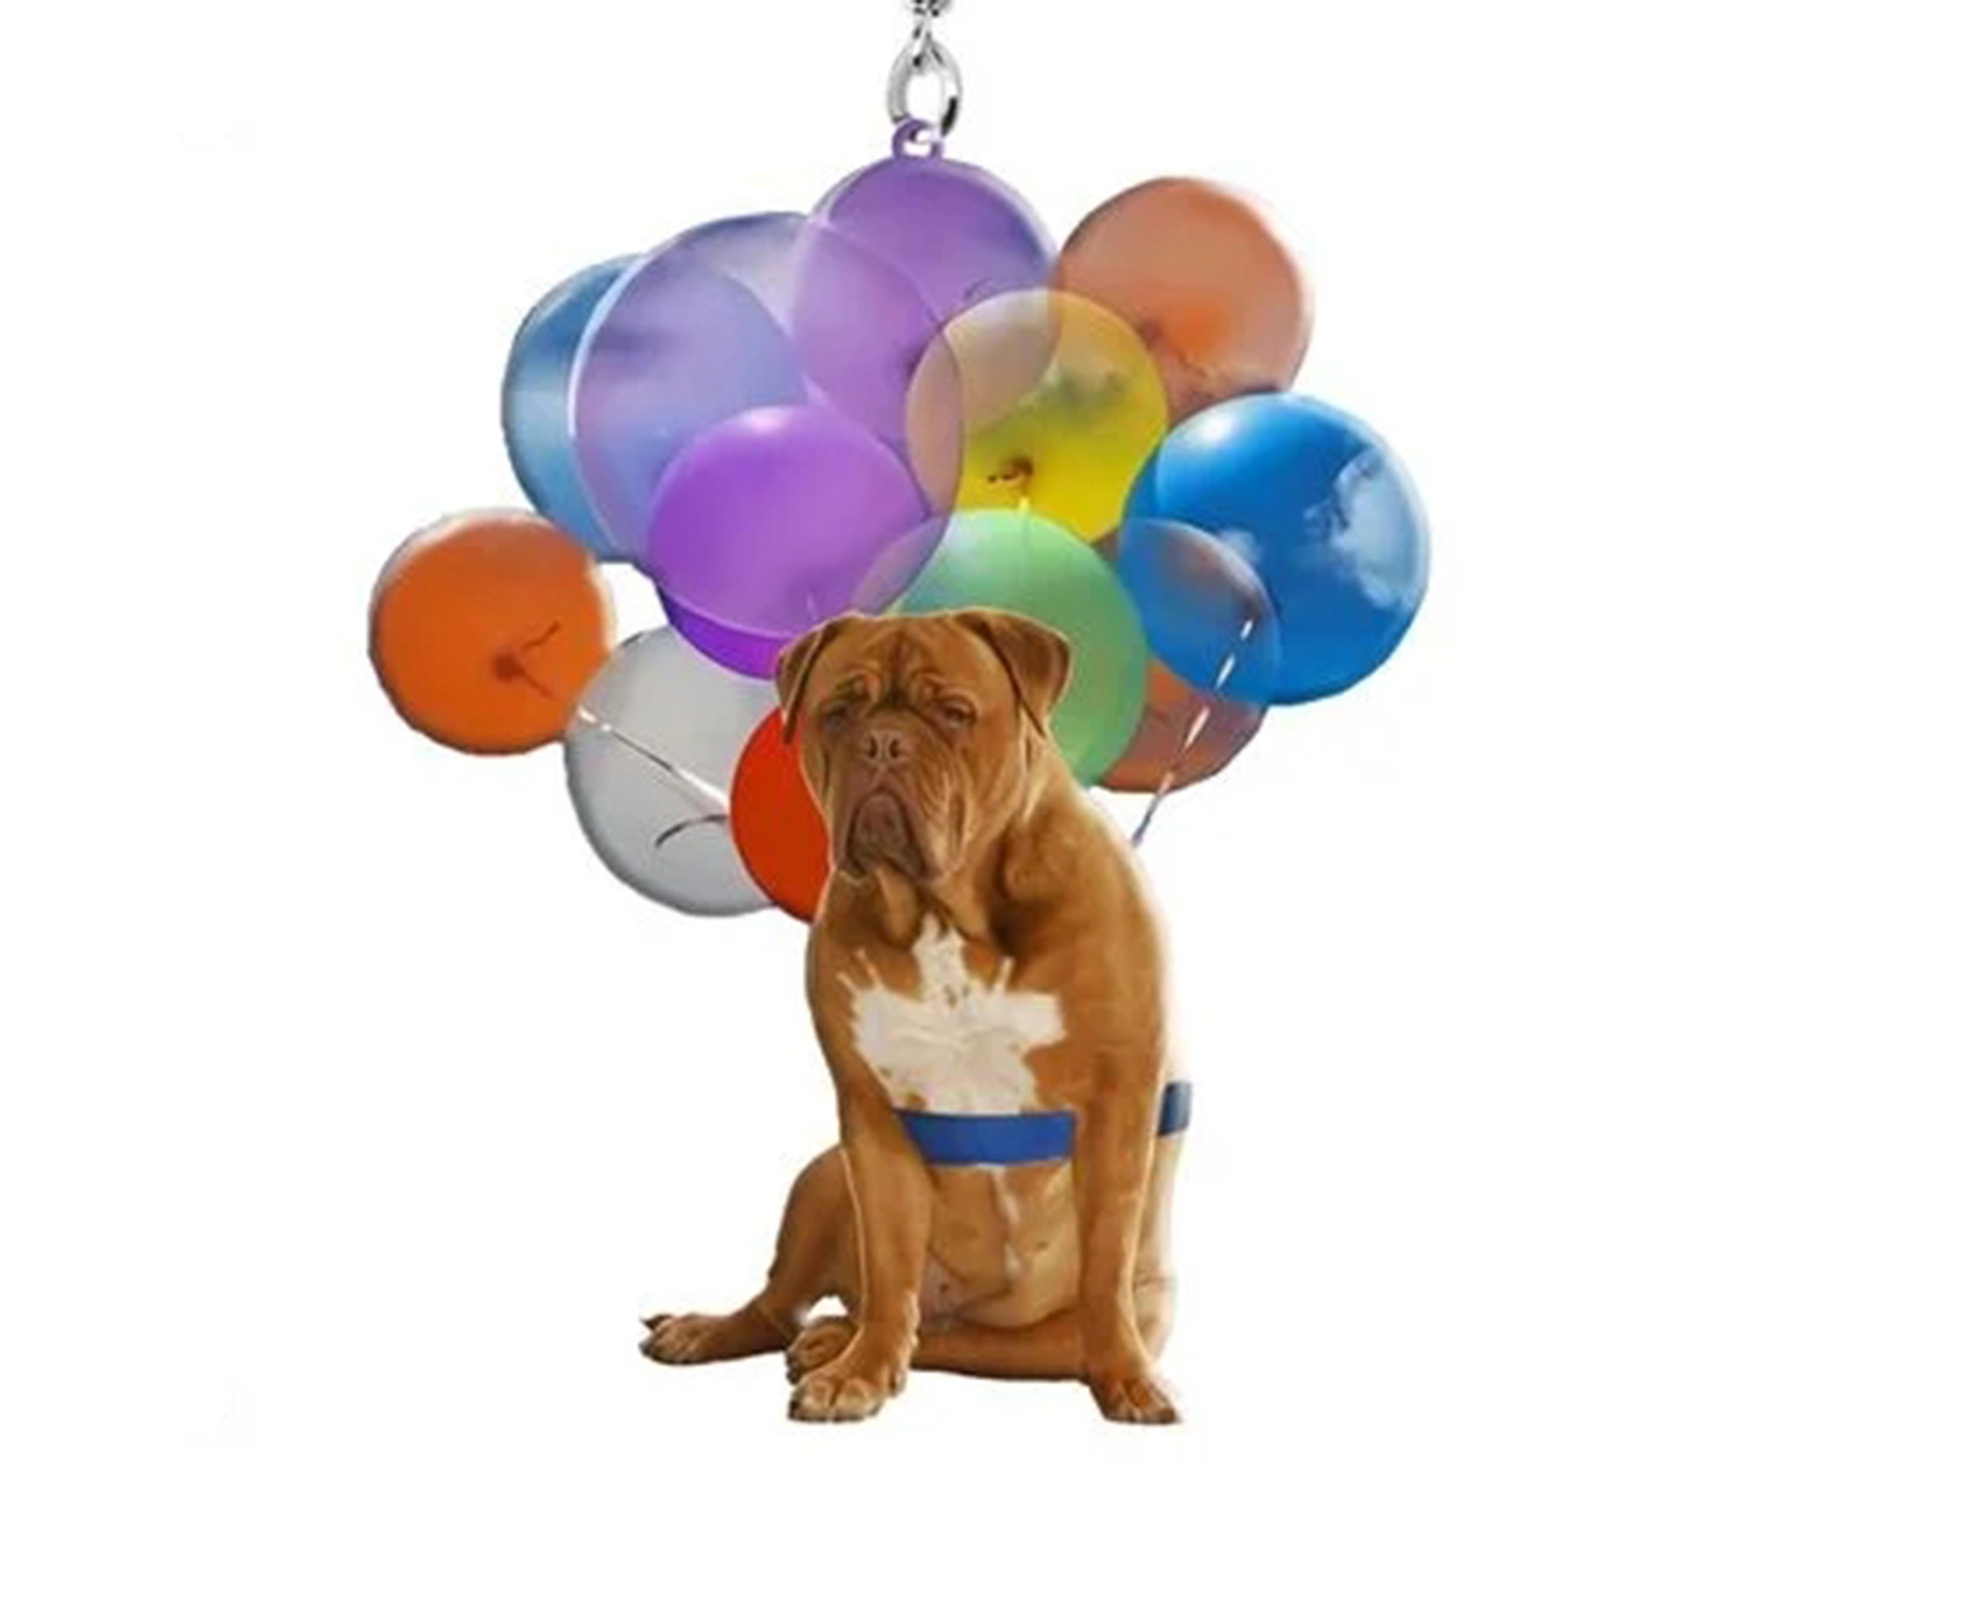 Dog And Balloon Car Hanging Ornament Car Cute Dog Hanging Ornament With Bubbles-Hanging Ornament Decors 2D Effect Car Interior Rearview Mirror Hanging Decor A 